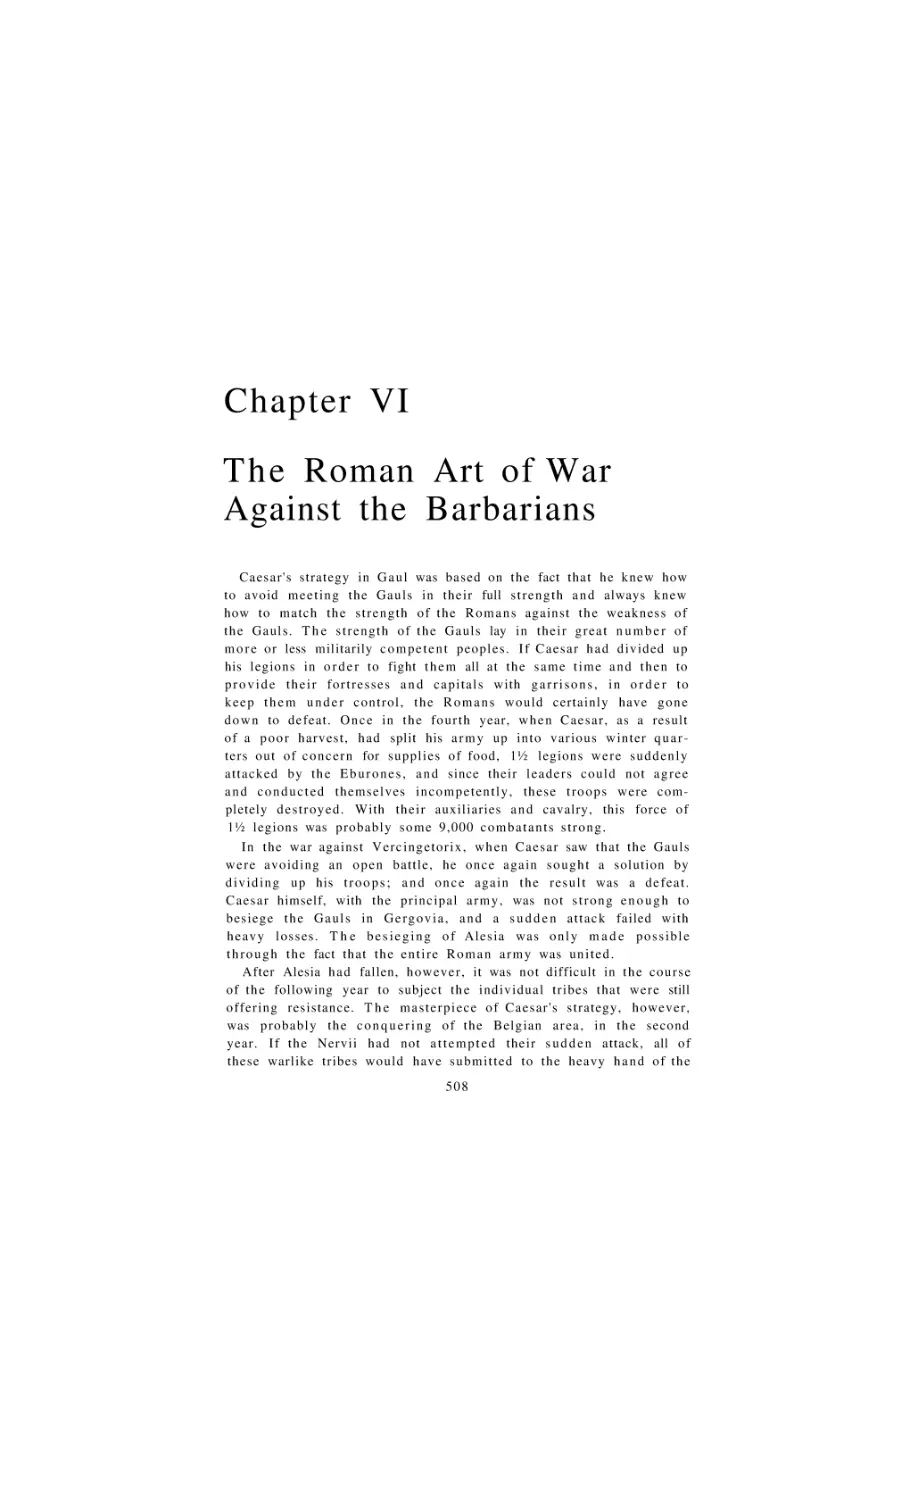 The Roman Art of War Against the Barbarians